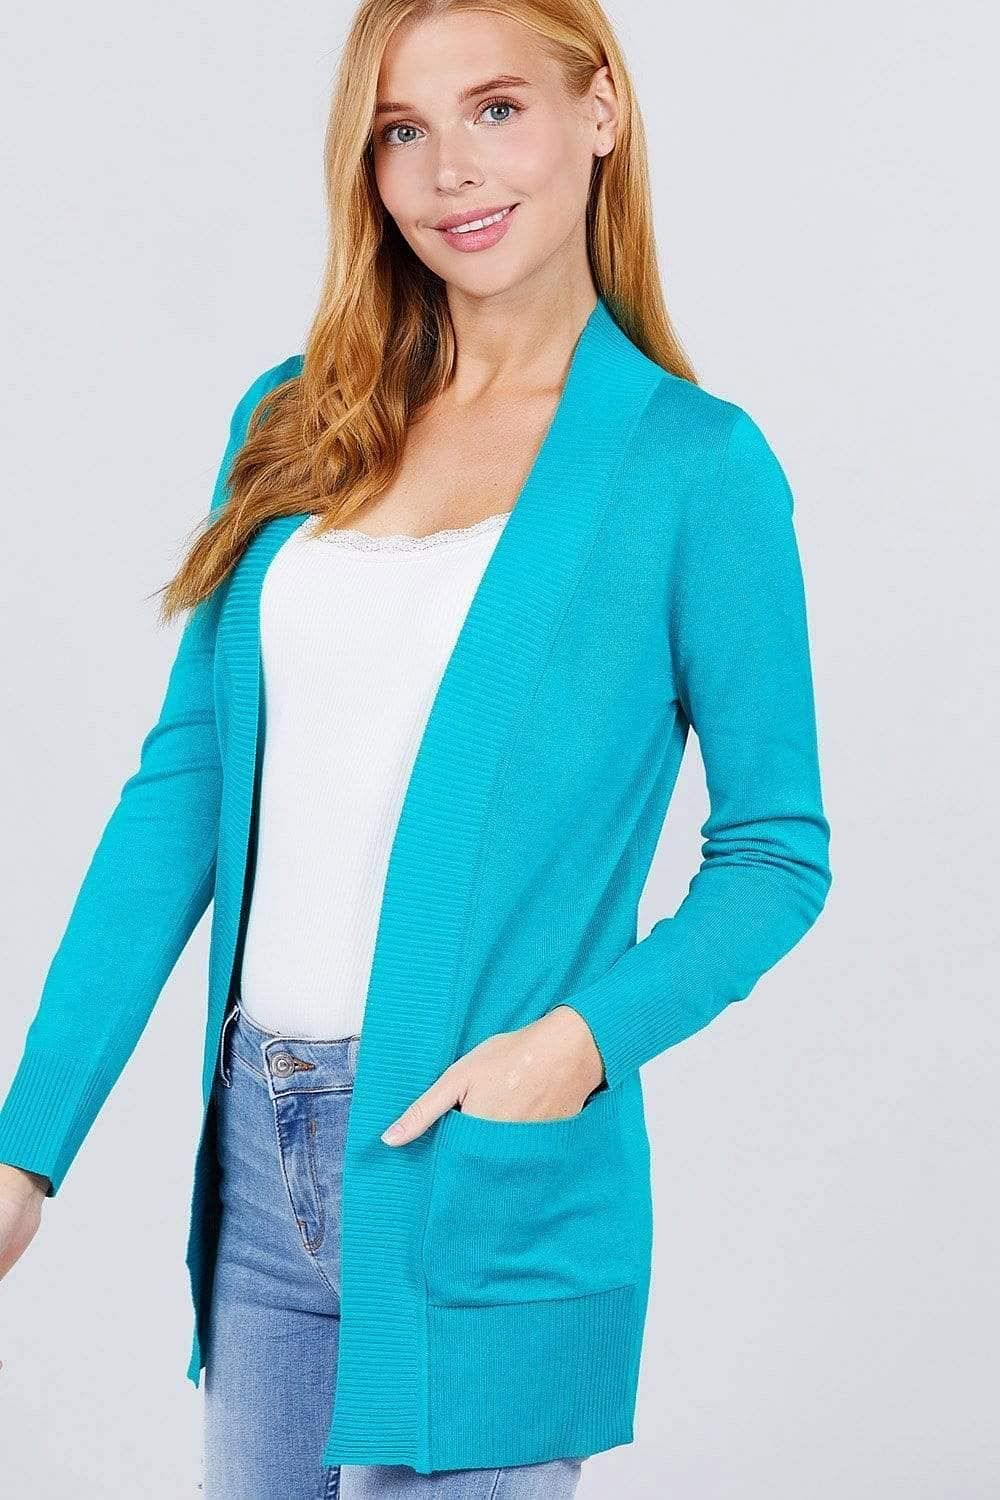 Turquoise Long Sleeve Open-Front Rib Knit Cardigan - Shopping Therapy Cardigan